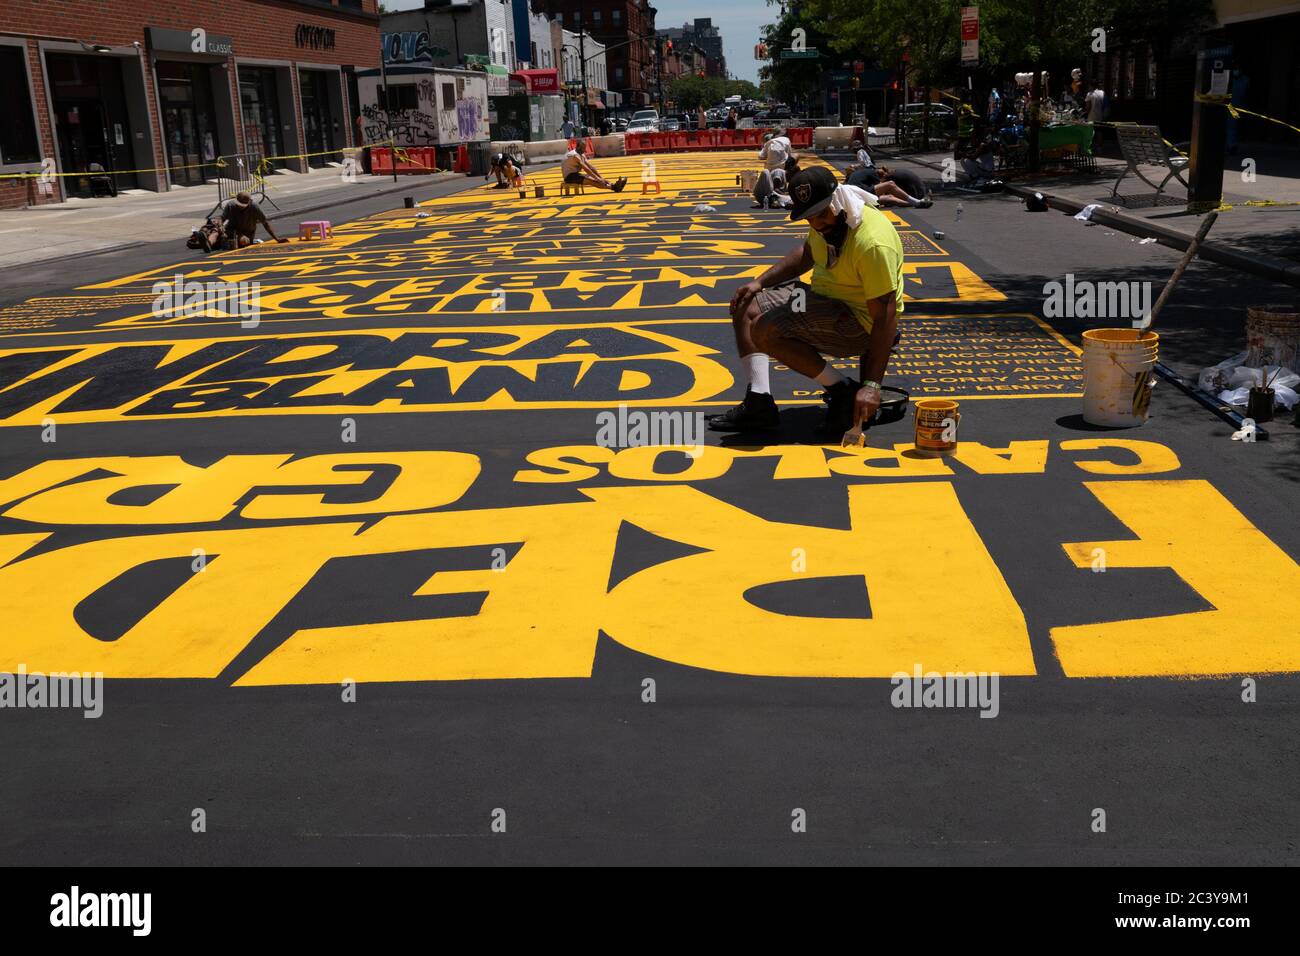 New York, New York, USA. 22nd June, 2020. Inspired by the public art piece in Washington, DC an those happening around the country, more than 20 Brooklyn based artist created New York's first Black Lives Matter street Art Mural in the Bedford-Stuyvesant neighborhood of Brooklyn in New York, New York. The Mural was created for the names of Black people who've been killed by racially-motivated violence in this country from Emmett Till in 1955 to Rayshard Brooks of Atlanta, Ga. The Mural was organized byBillie Holiday Theatre and can be found on Fulton Street between Marcy and Brooklyn Street Stock Photo